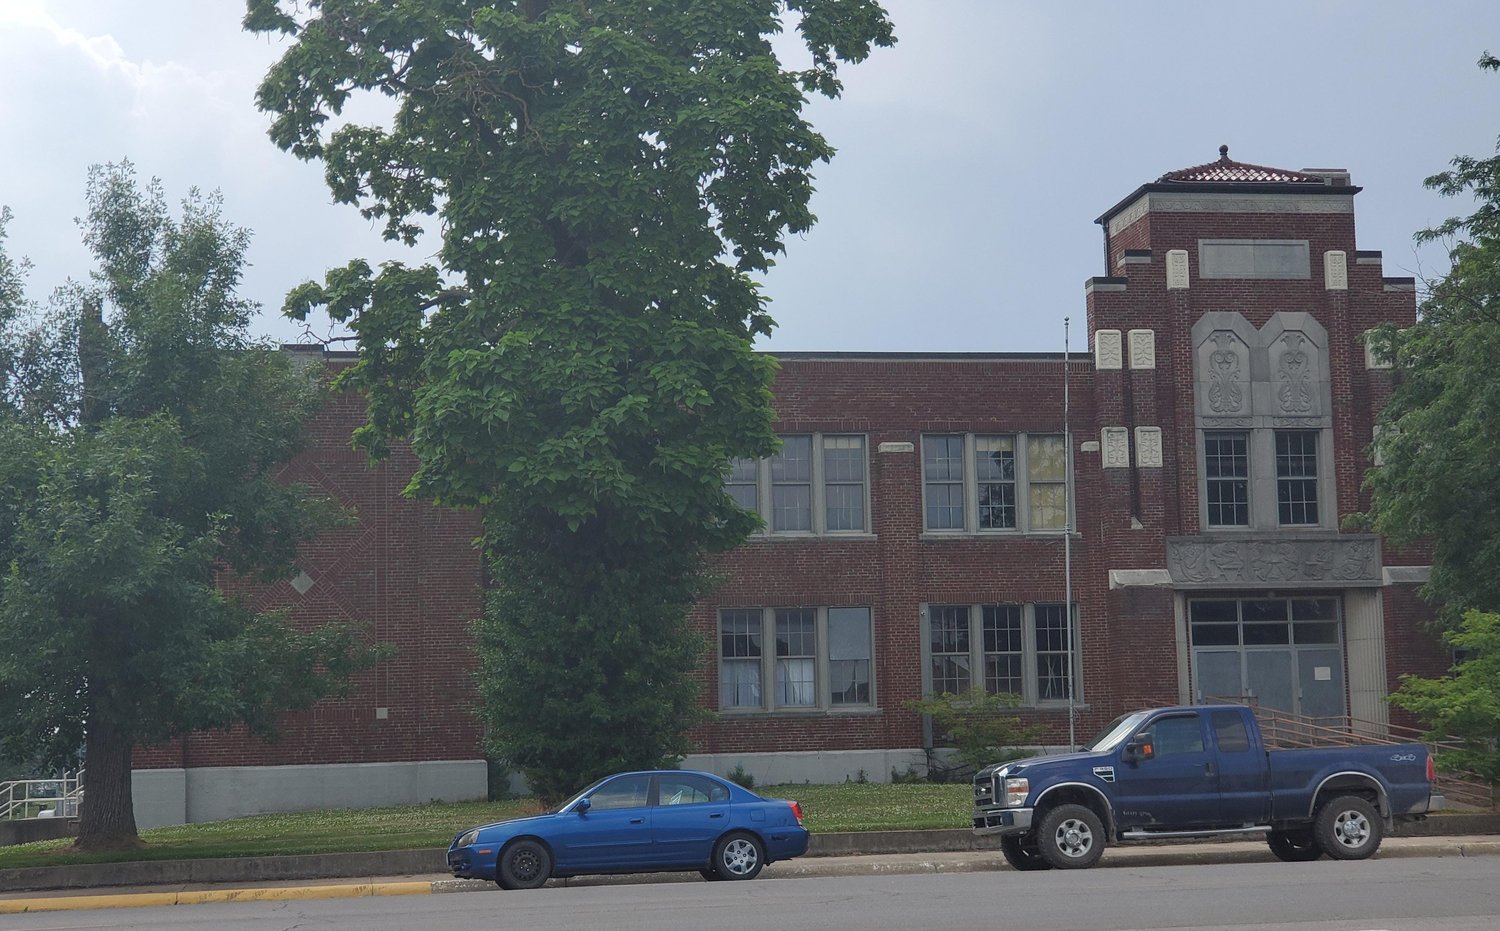 The old Moberly Junior High School by 2022 will have new occupants. It is being converted into senior housing through a $10.1 million rehabilitation.